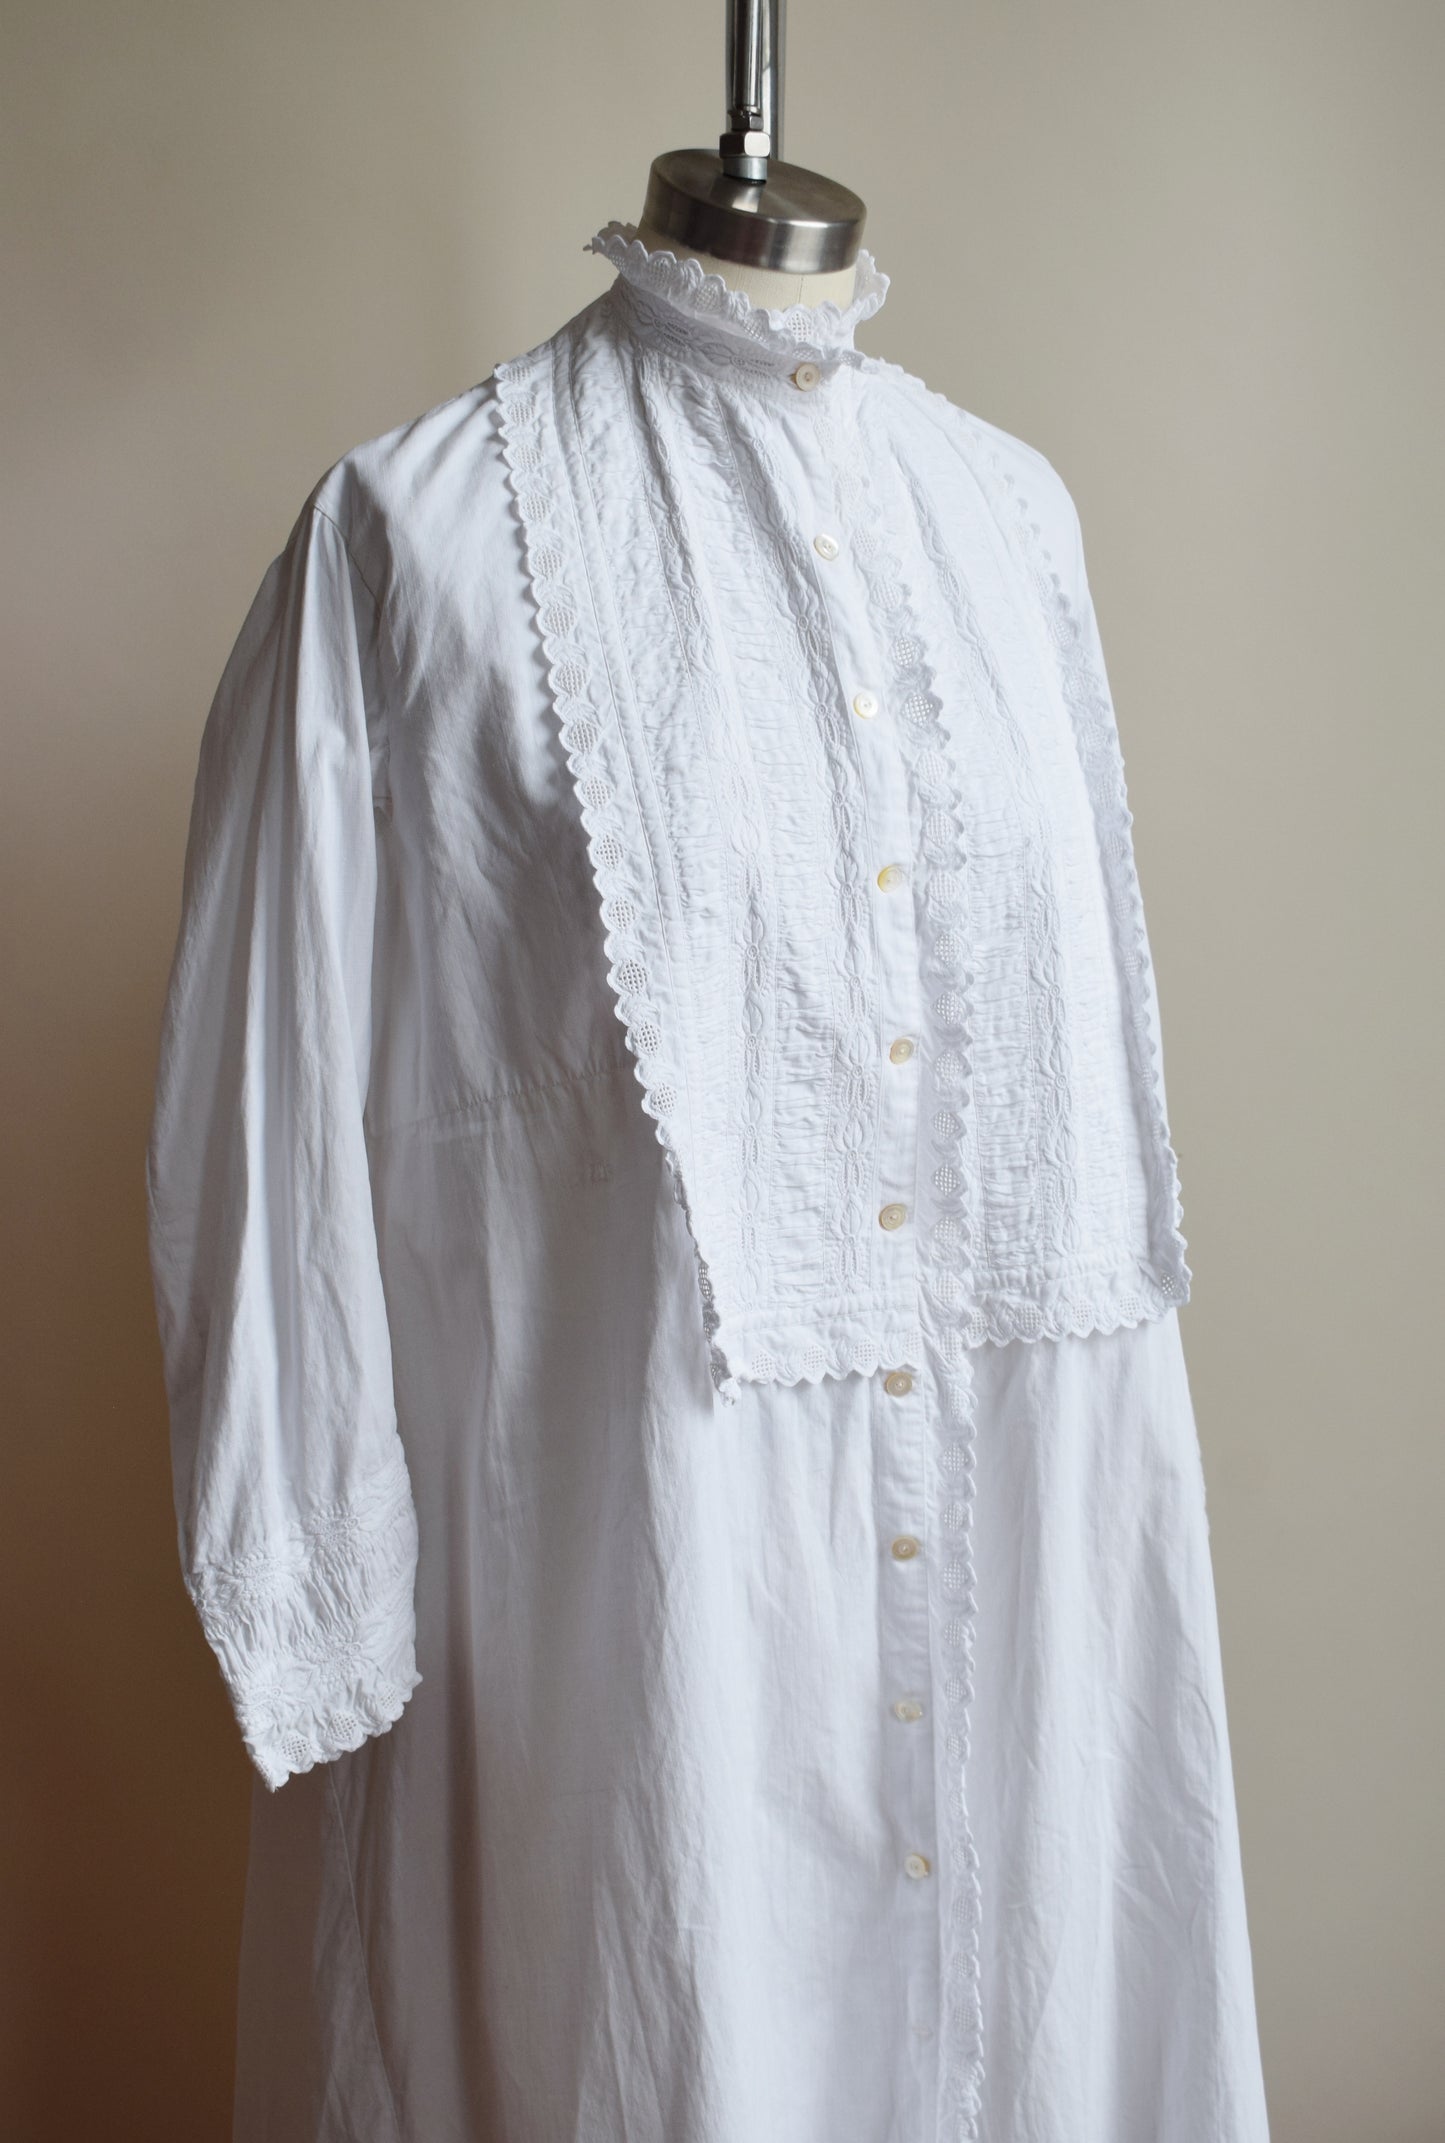 Antique Victorian Nightgown Dress/Duster | S